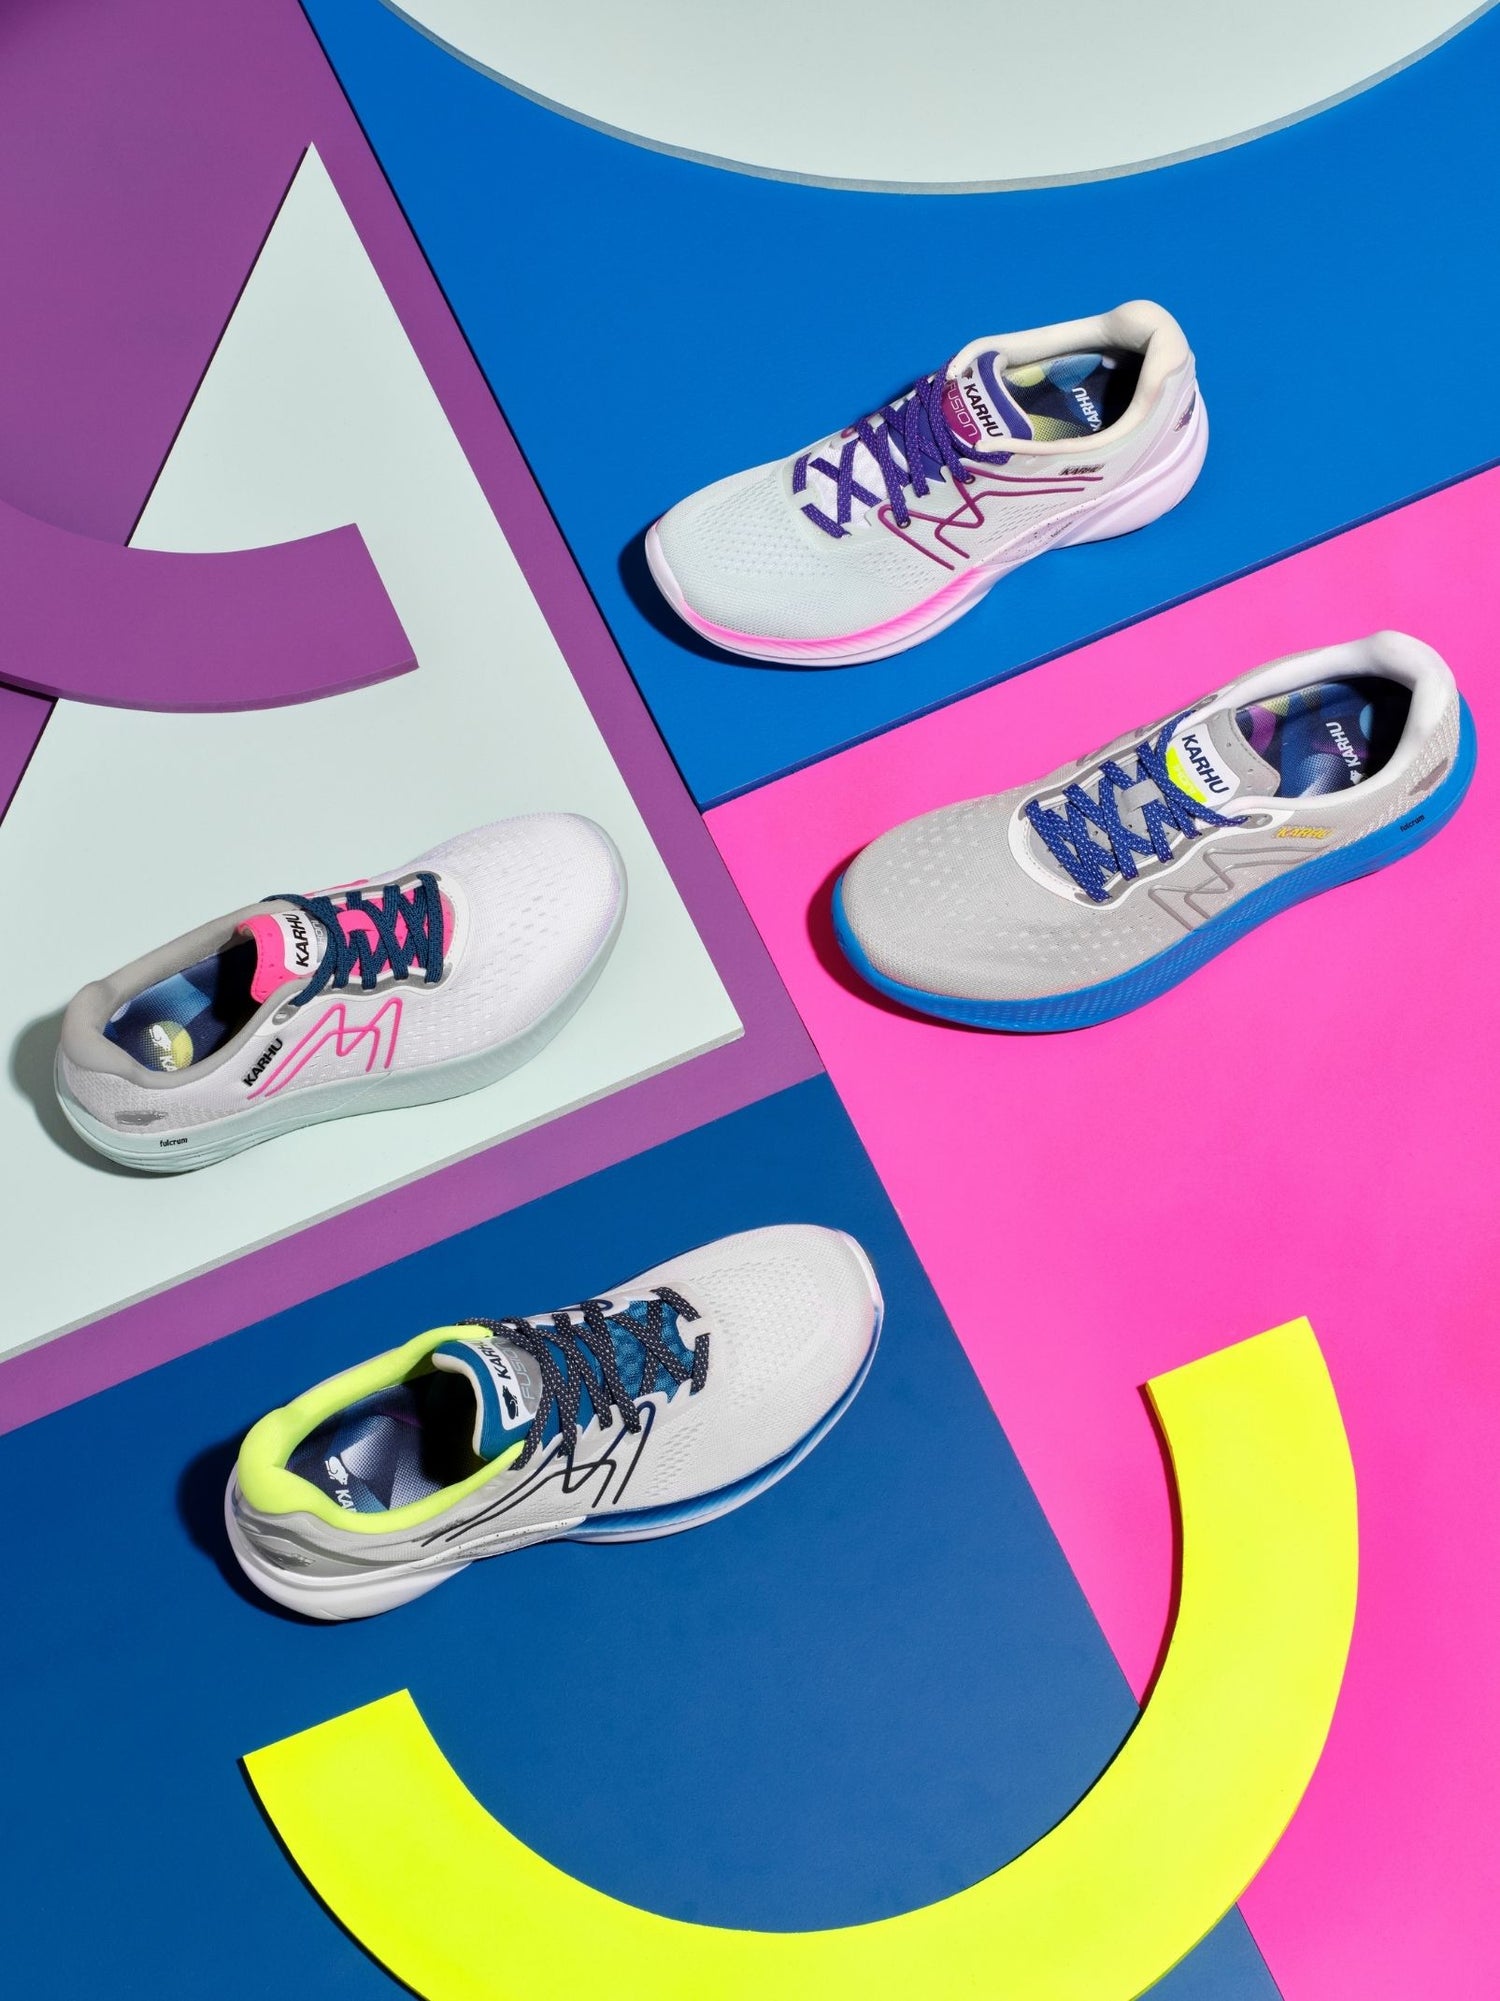 KARHU CELEBRATES 90s SPORT FASHION WITH THE NEON PACK